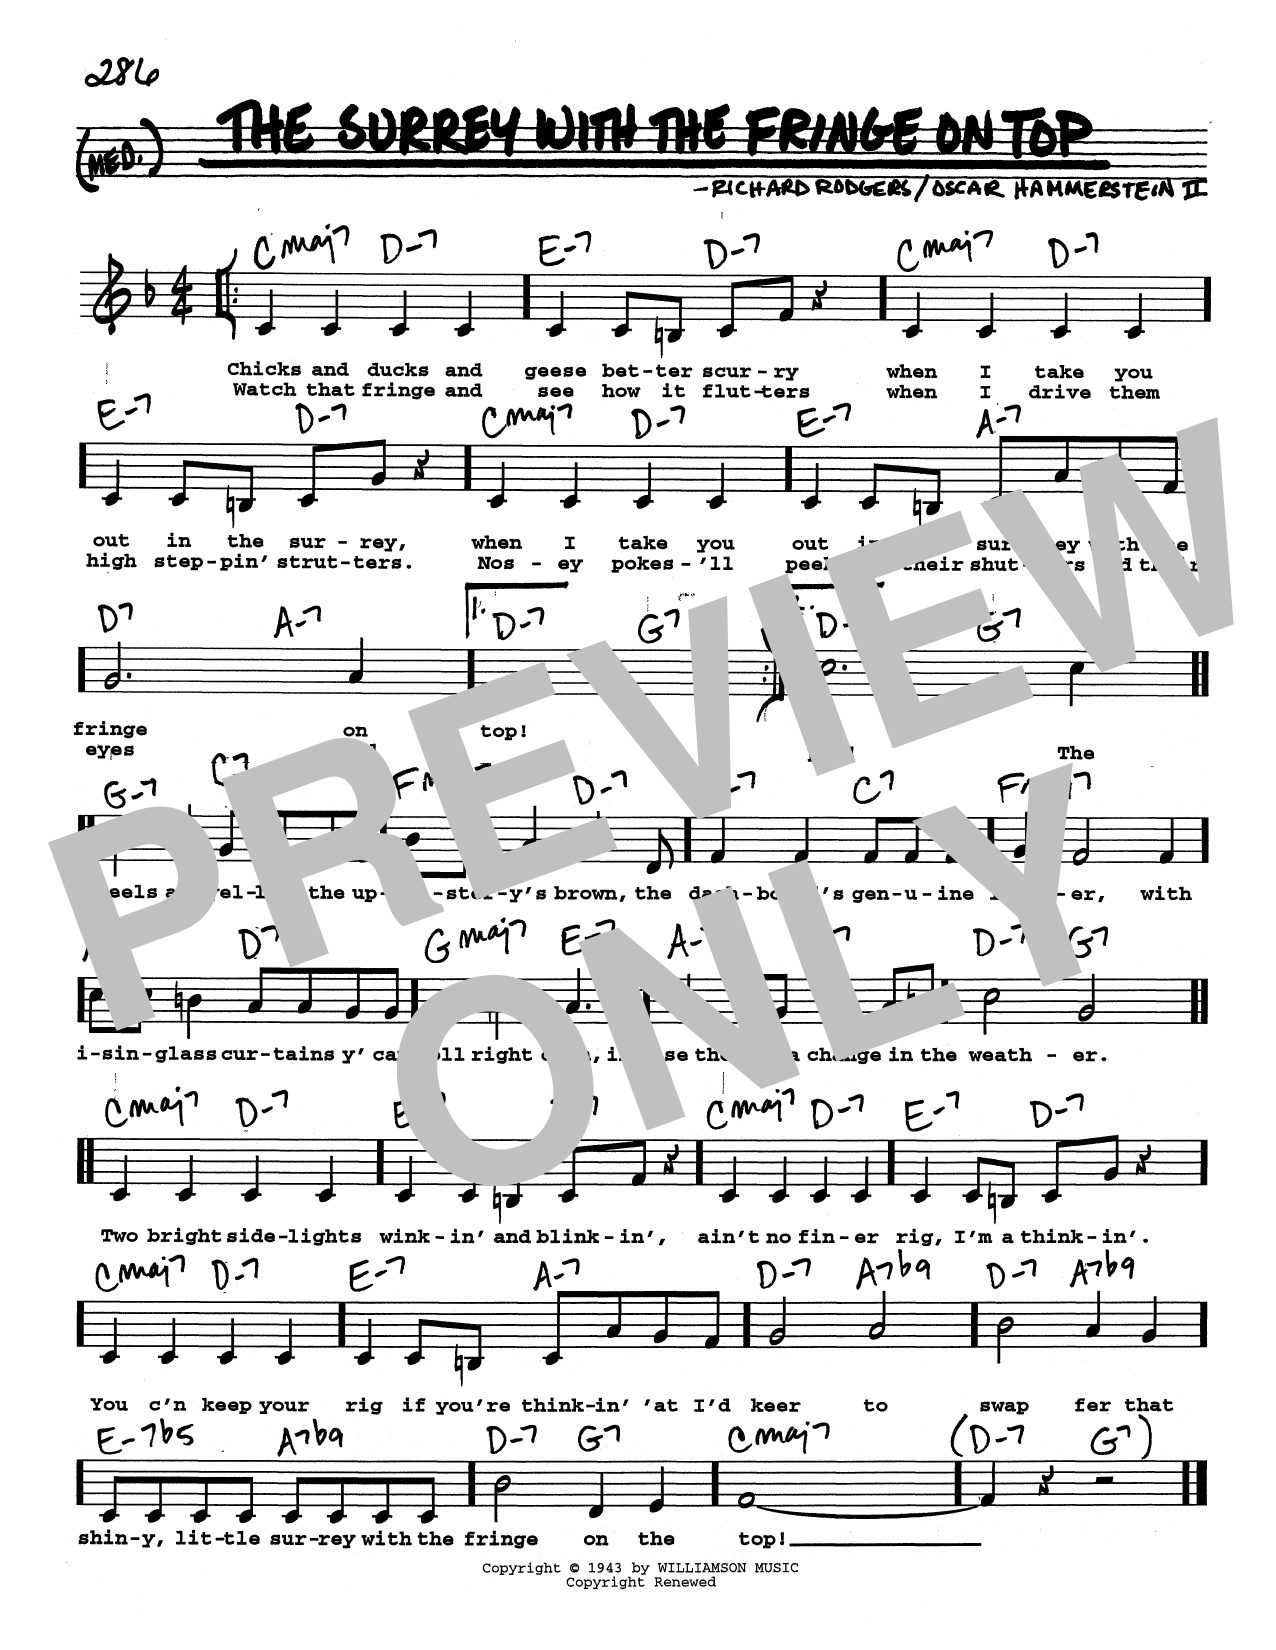 Rodgers & Hammerstein The Surrey With The Fringe On Top (Low Voice) sheet music notes printable PDF score